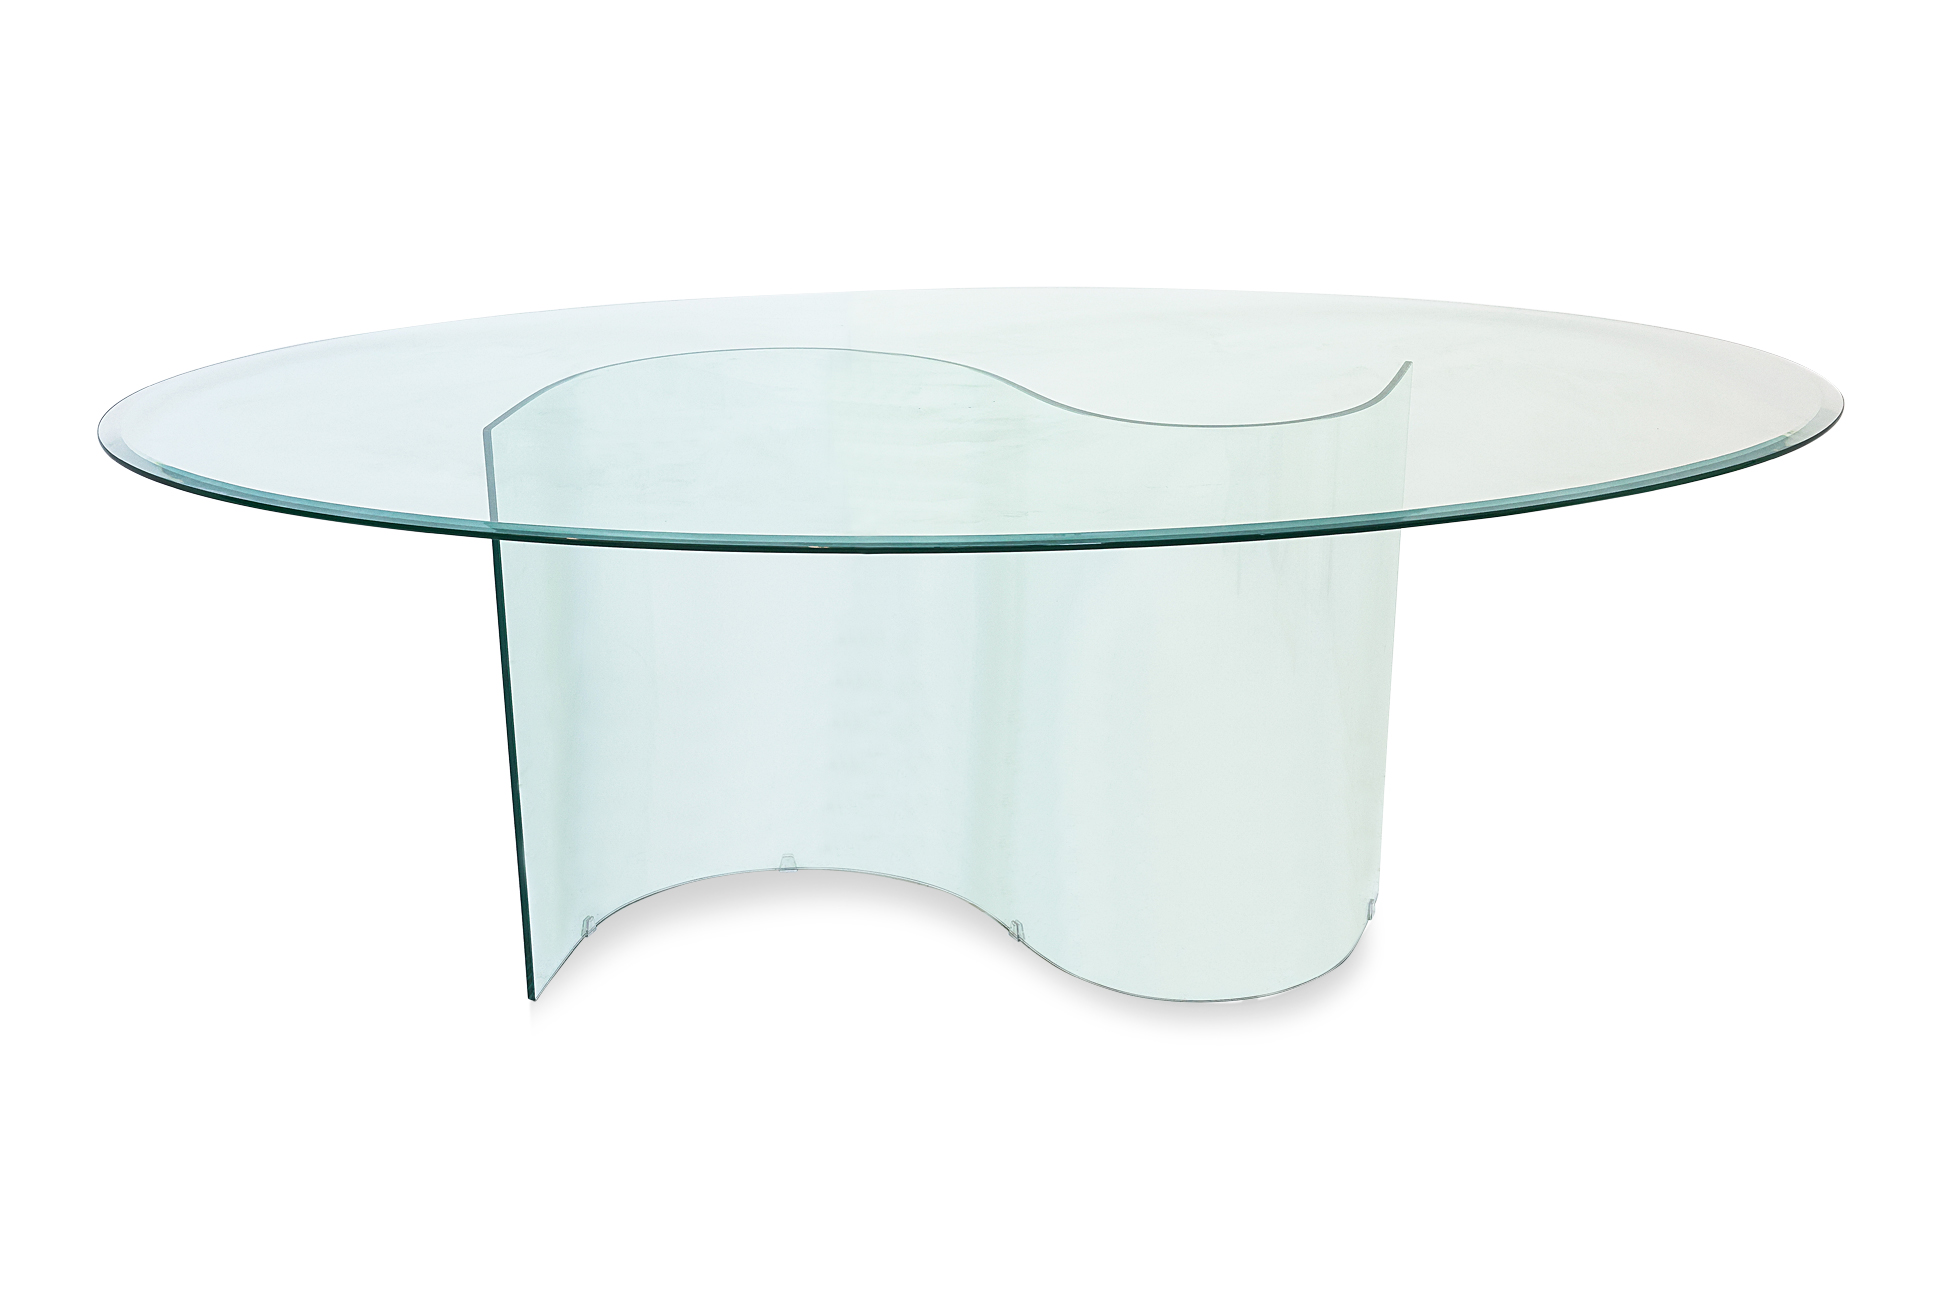 A GLASS DINING TABLE